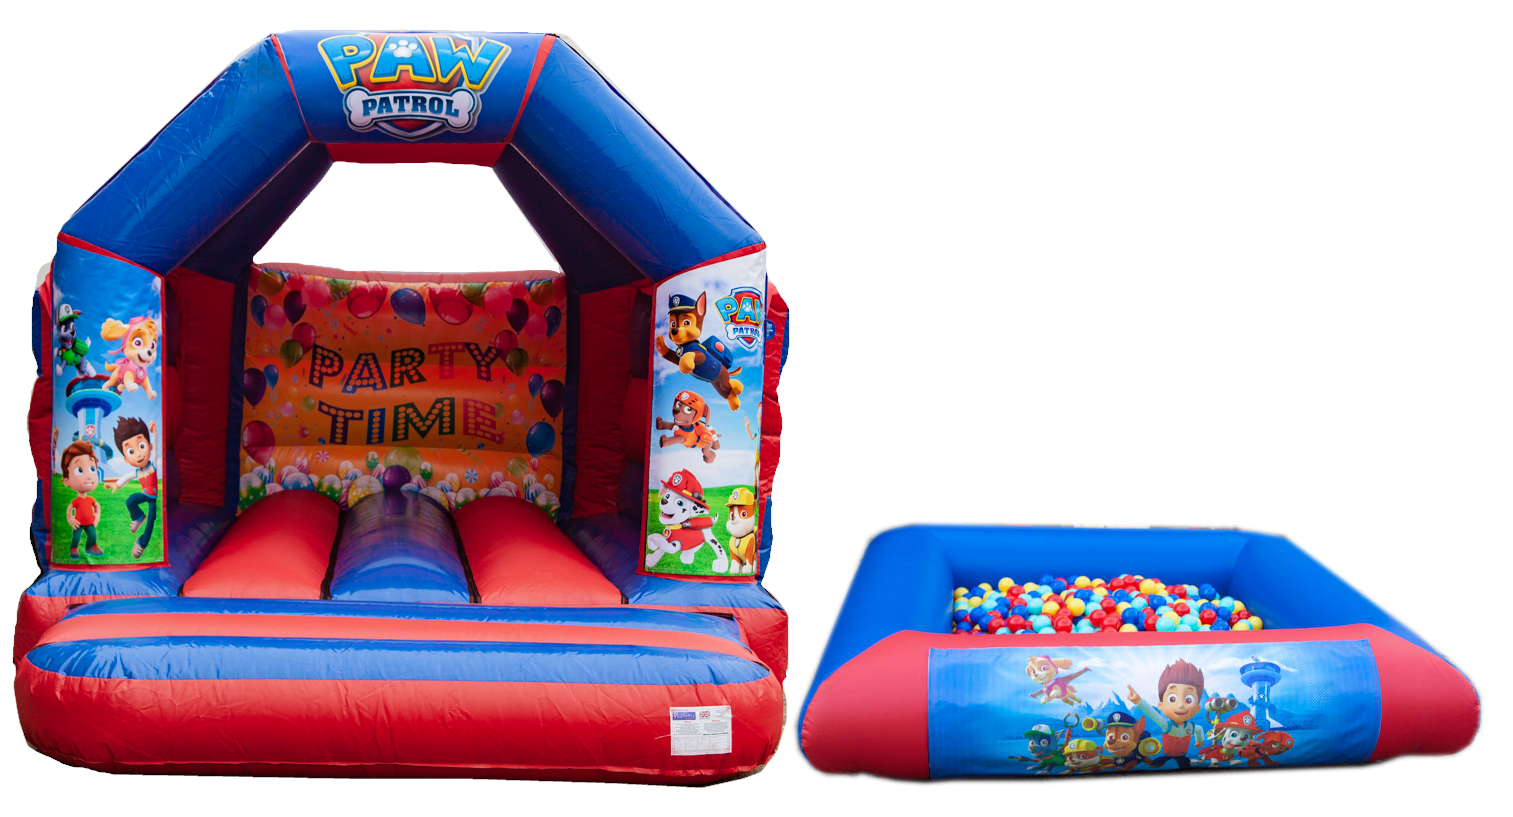 Red & Blue Bouncy castle and ball pool package for hire in Fairfield Park